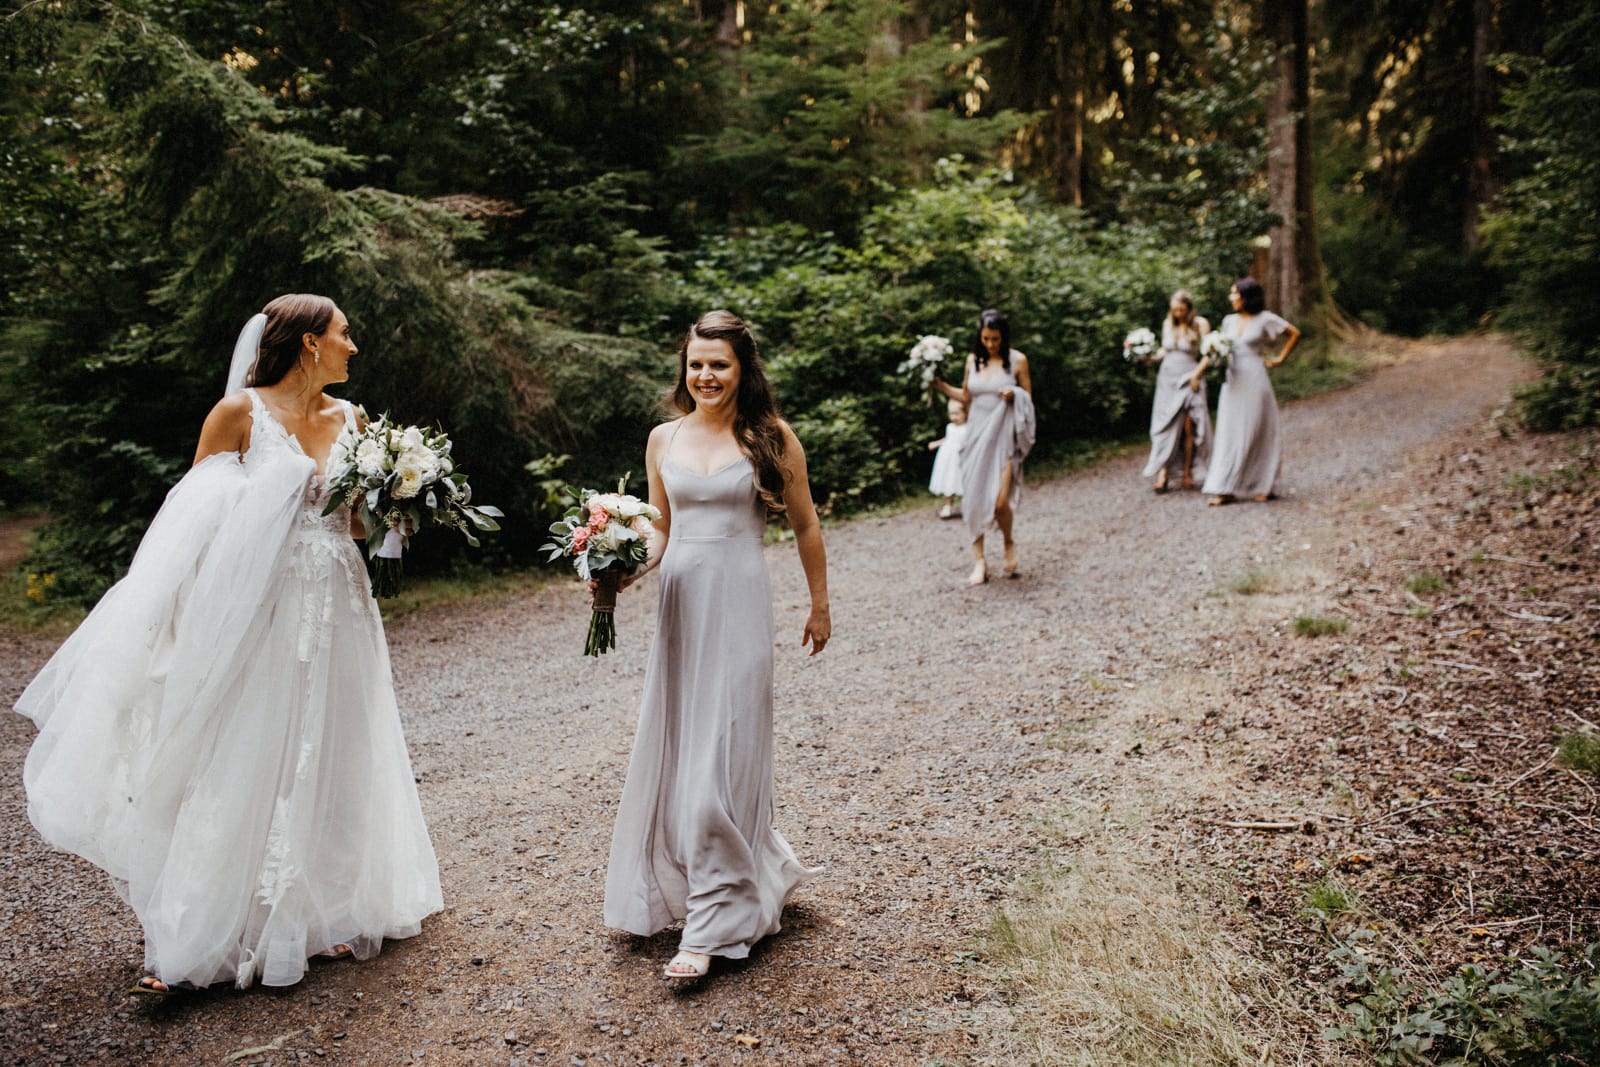 Silver Falls State Park Wedding